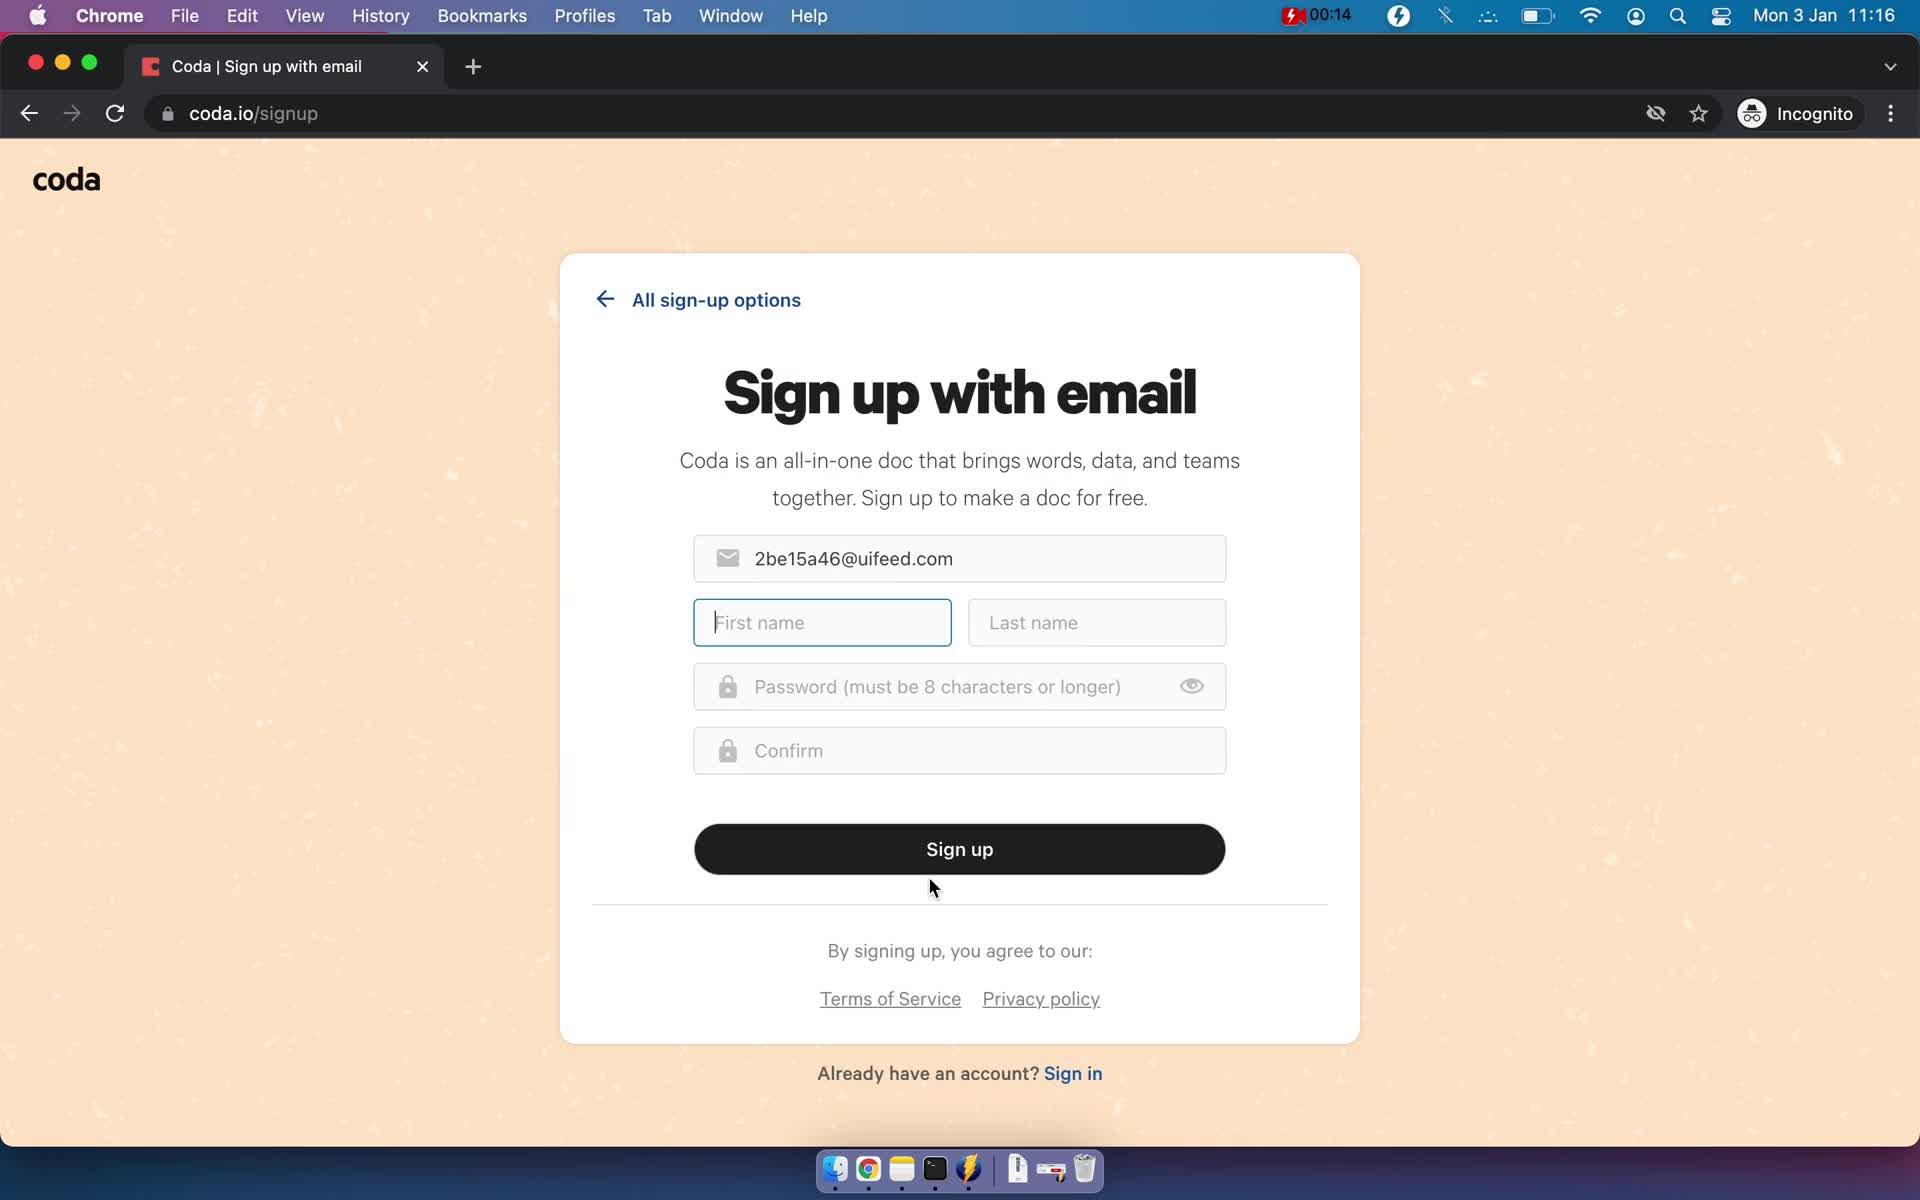 Coda sign up with email screenshot